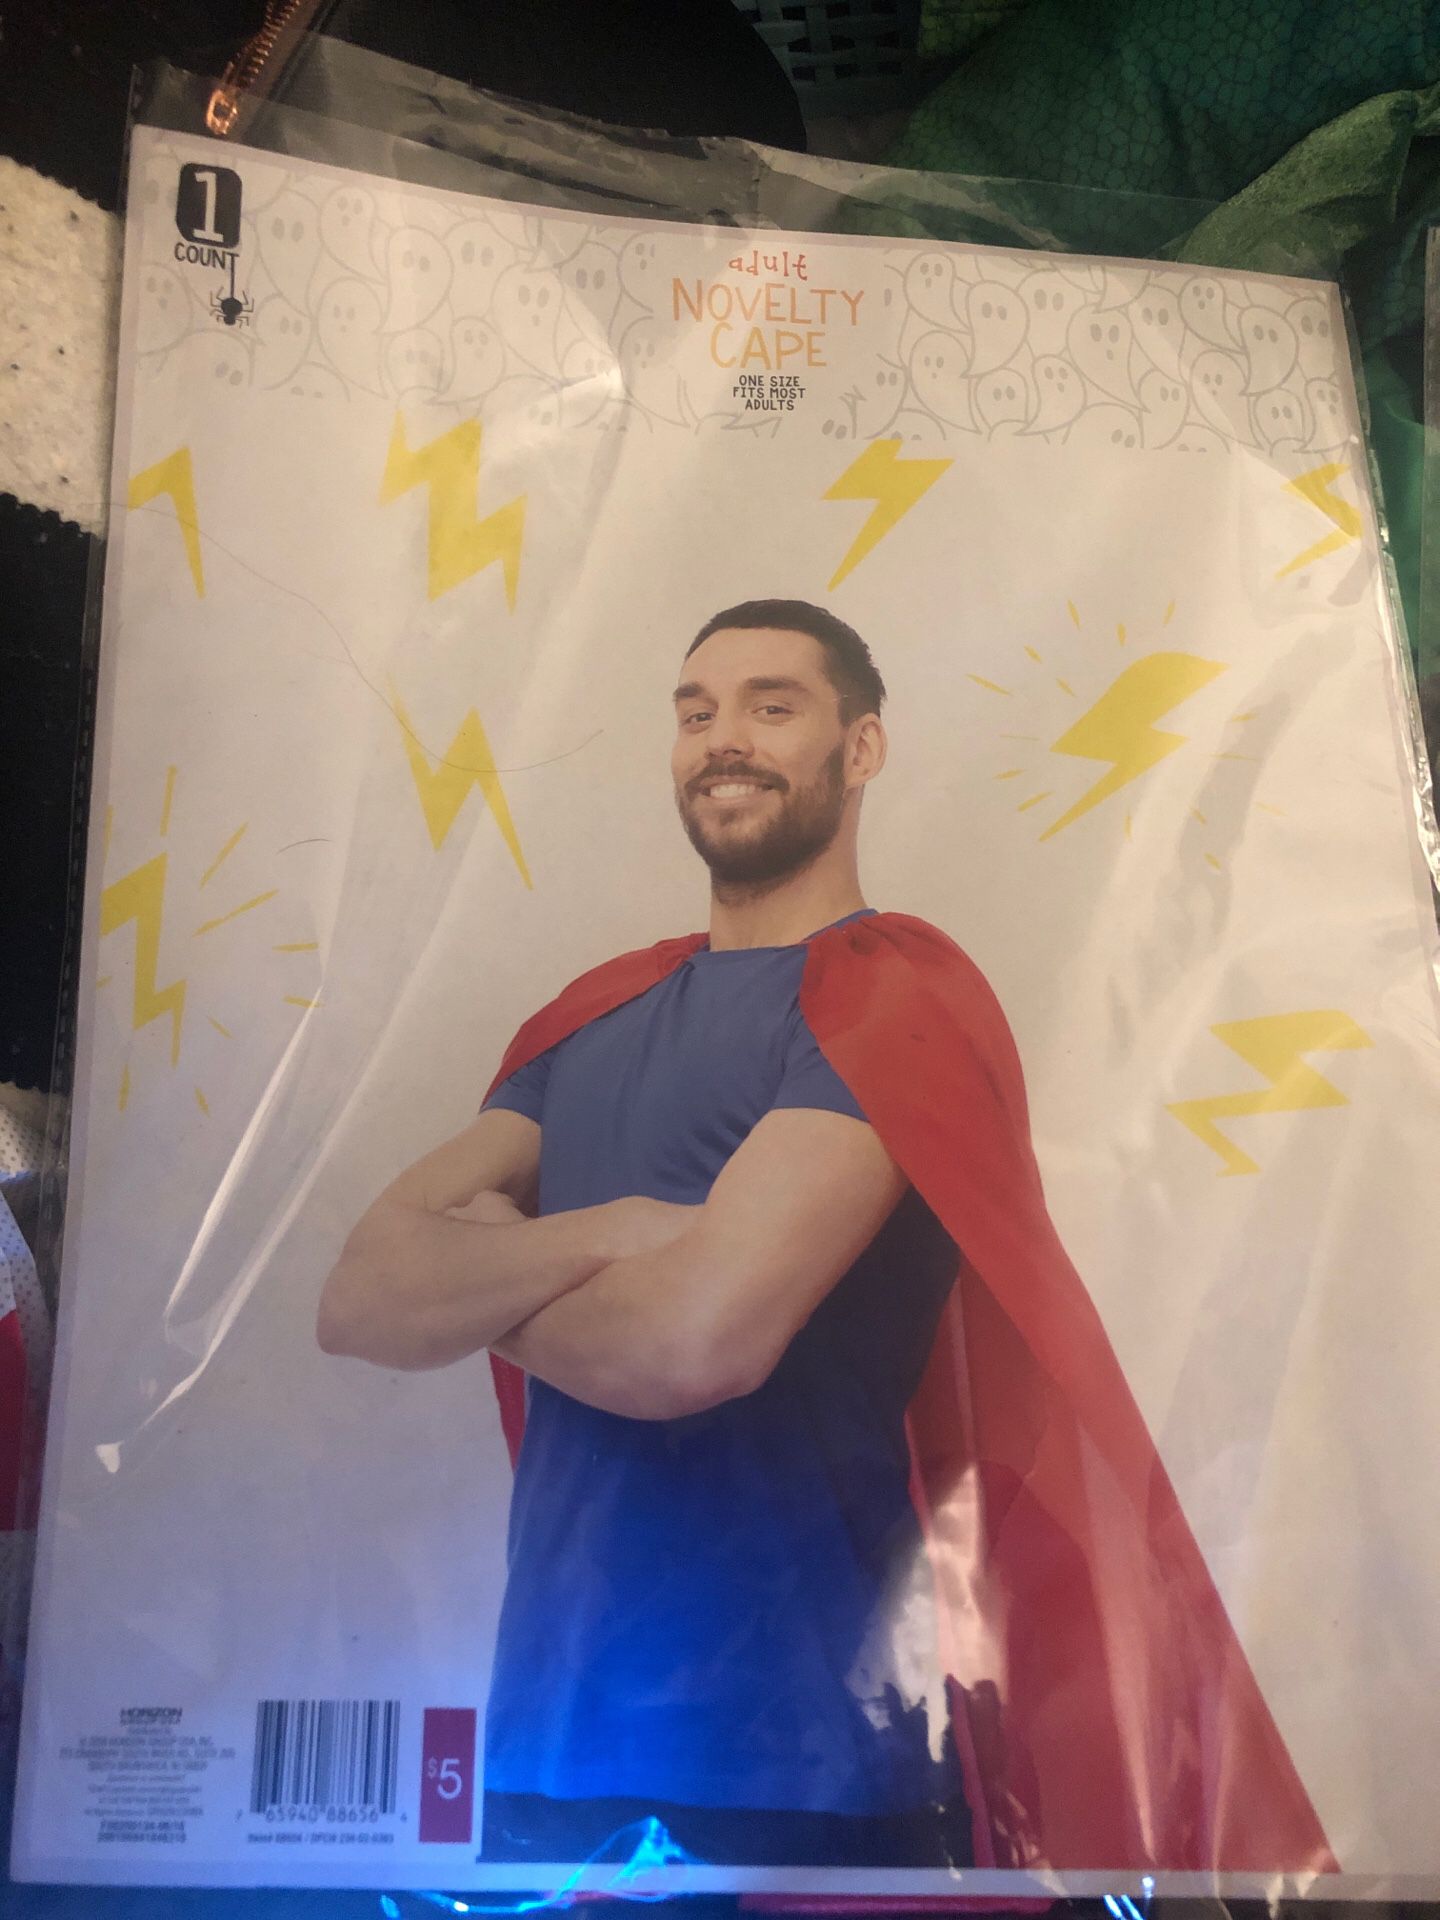 Two Adult Novelty Capes